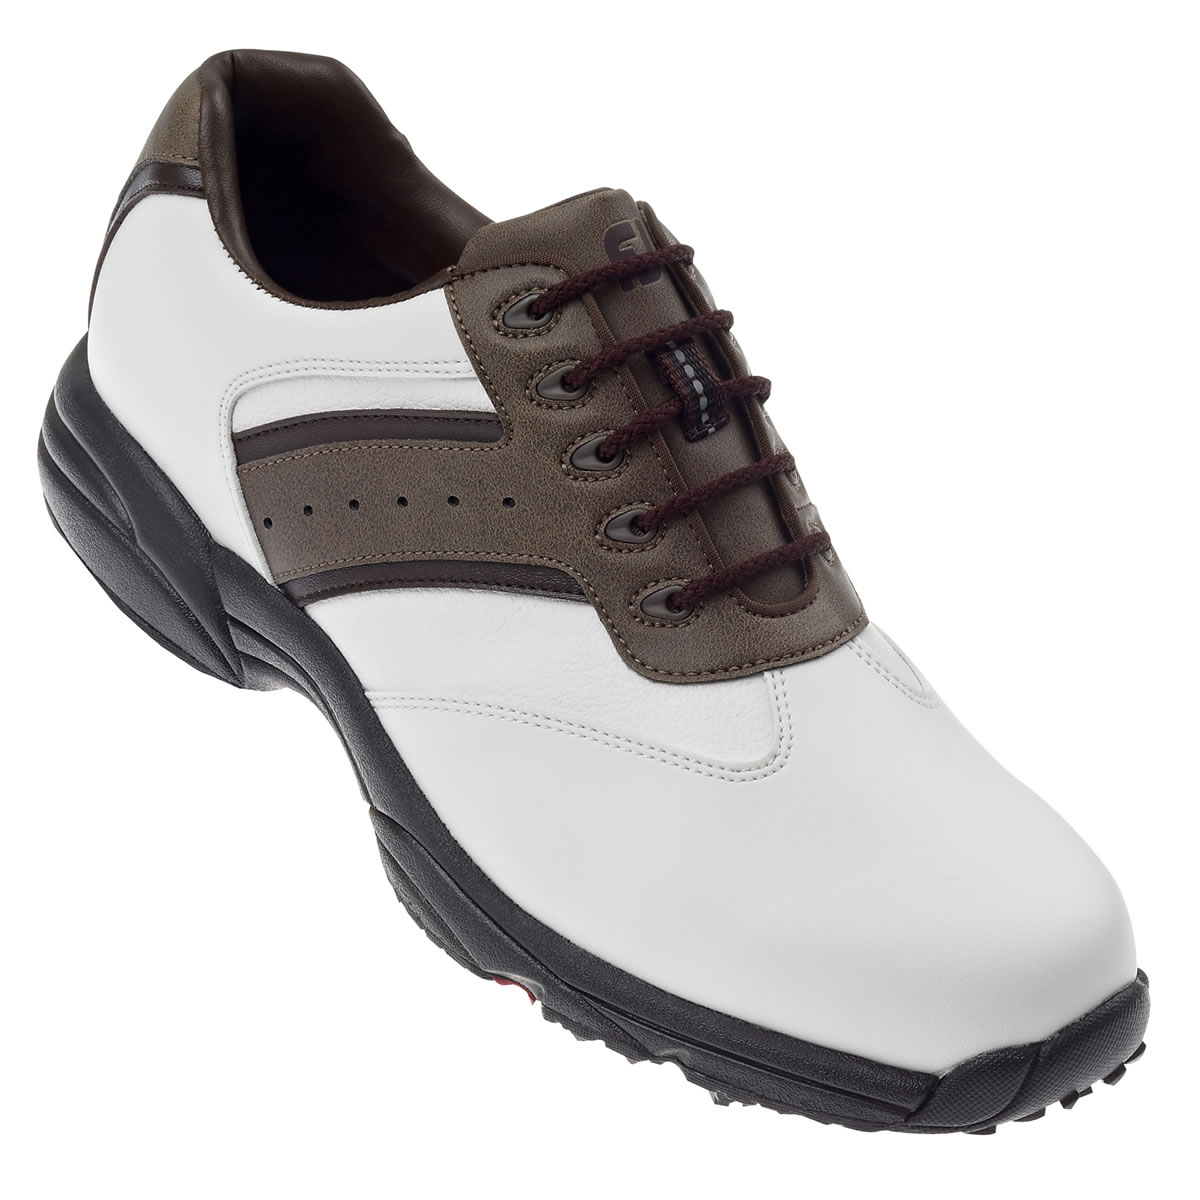 GreenJoys Golf Shoes White/Brown #45406